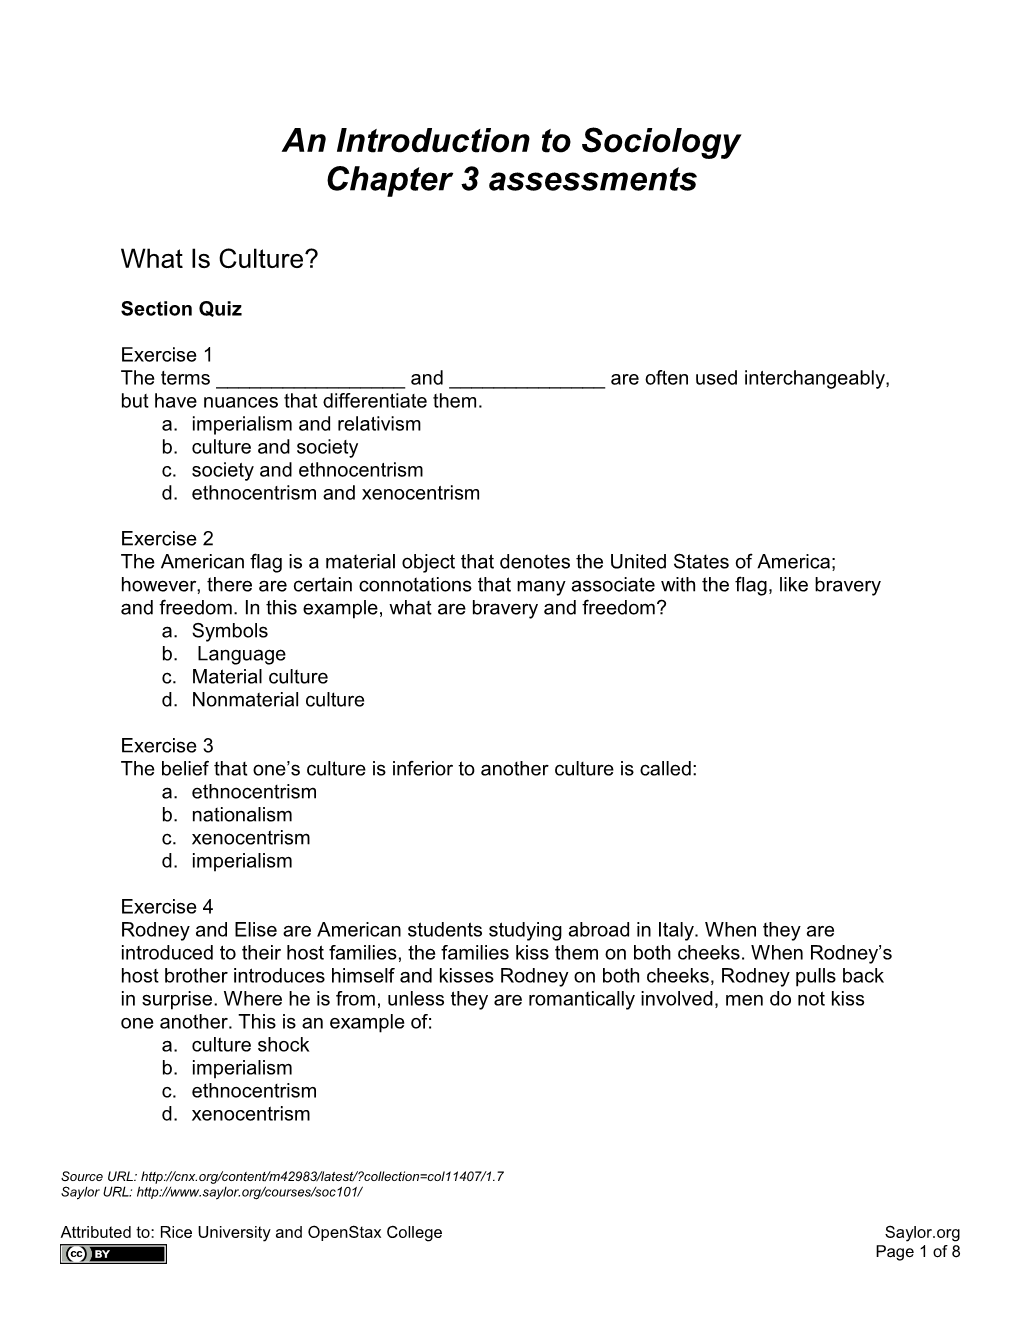 An Introduction to Sociology Chapter 3 Assessments